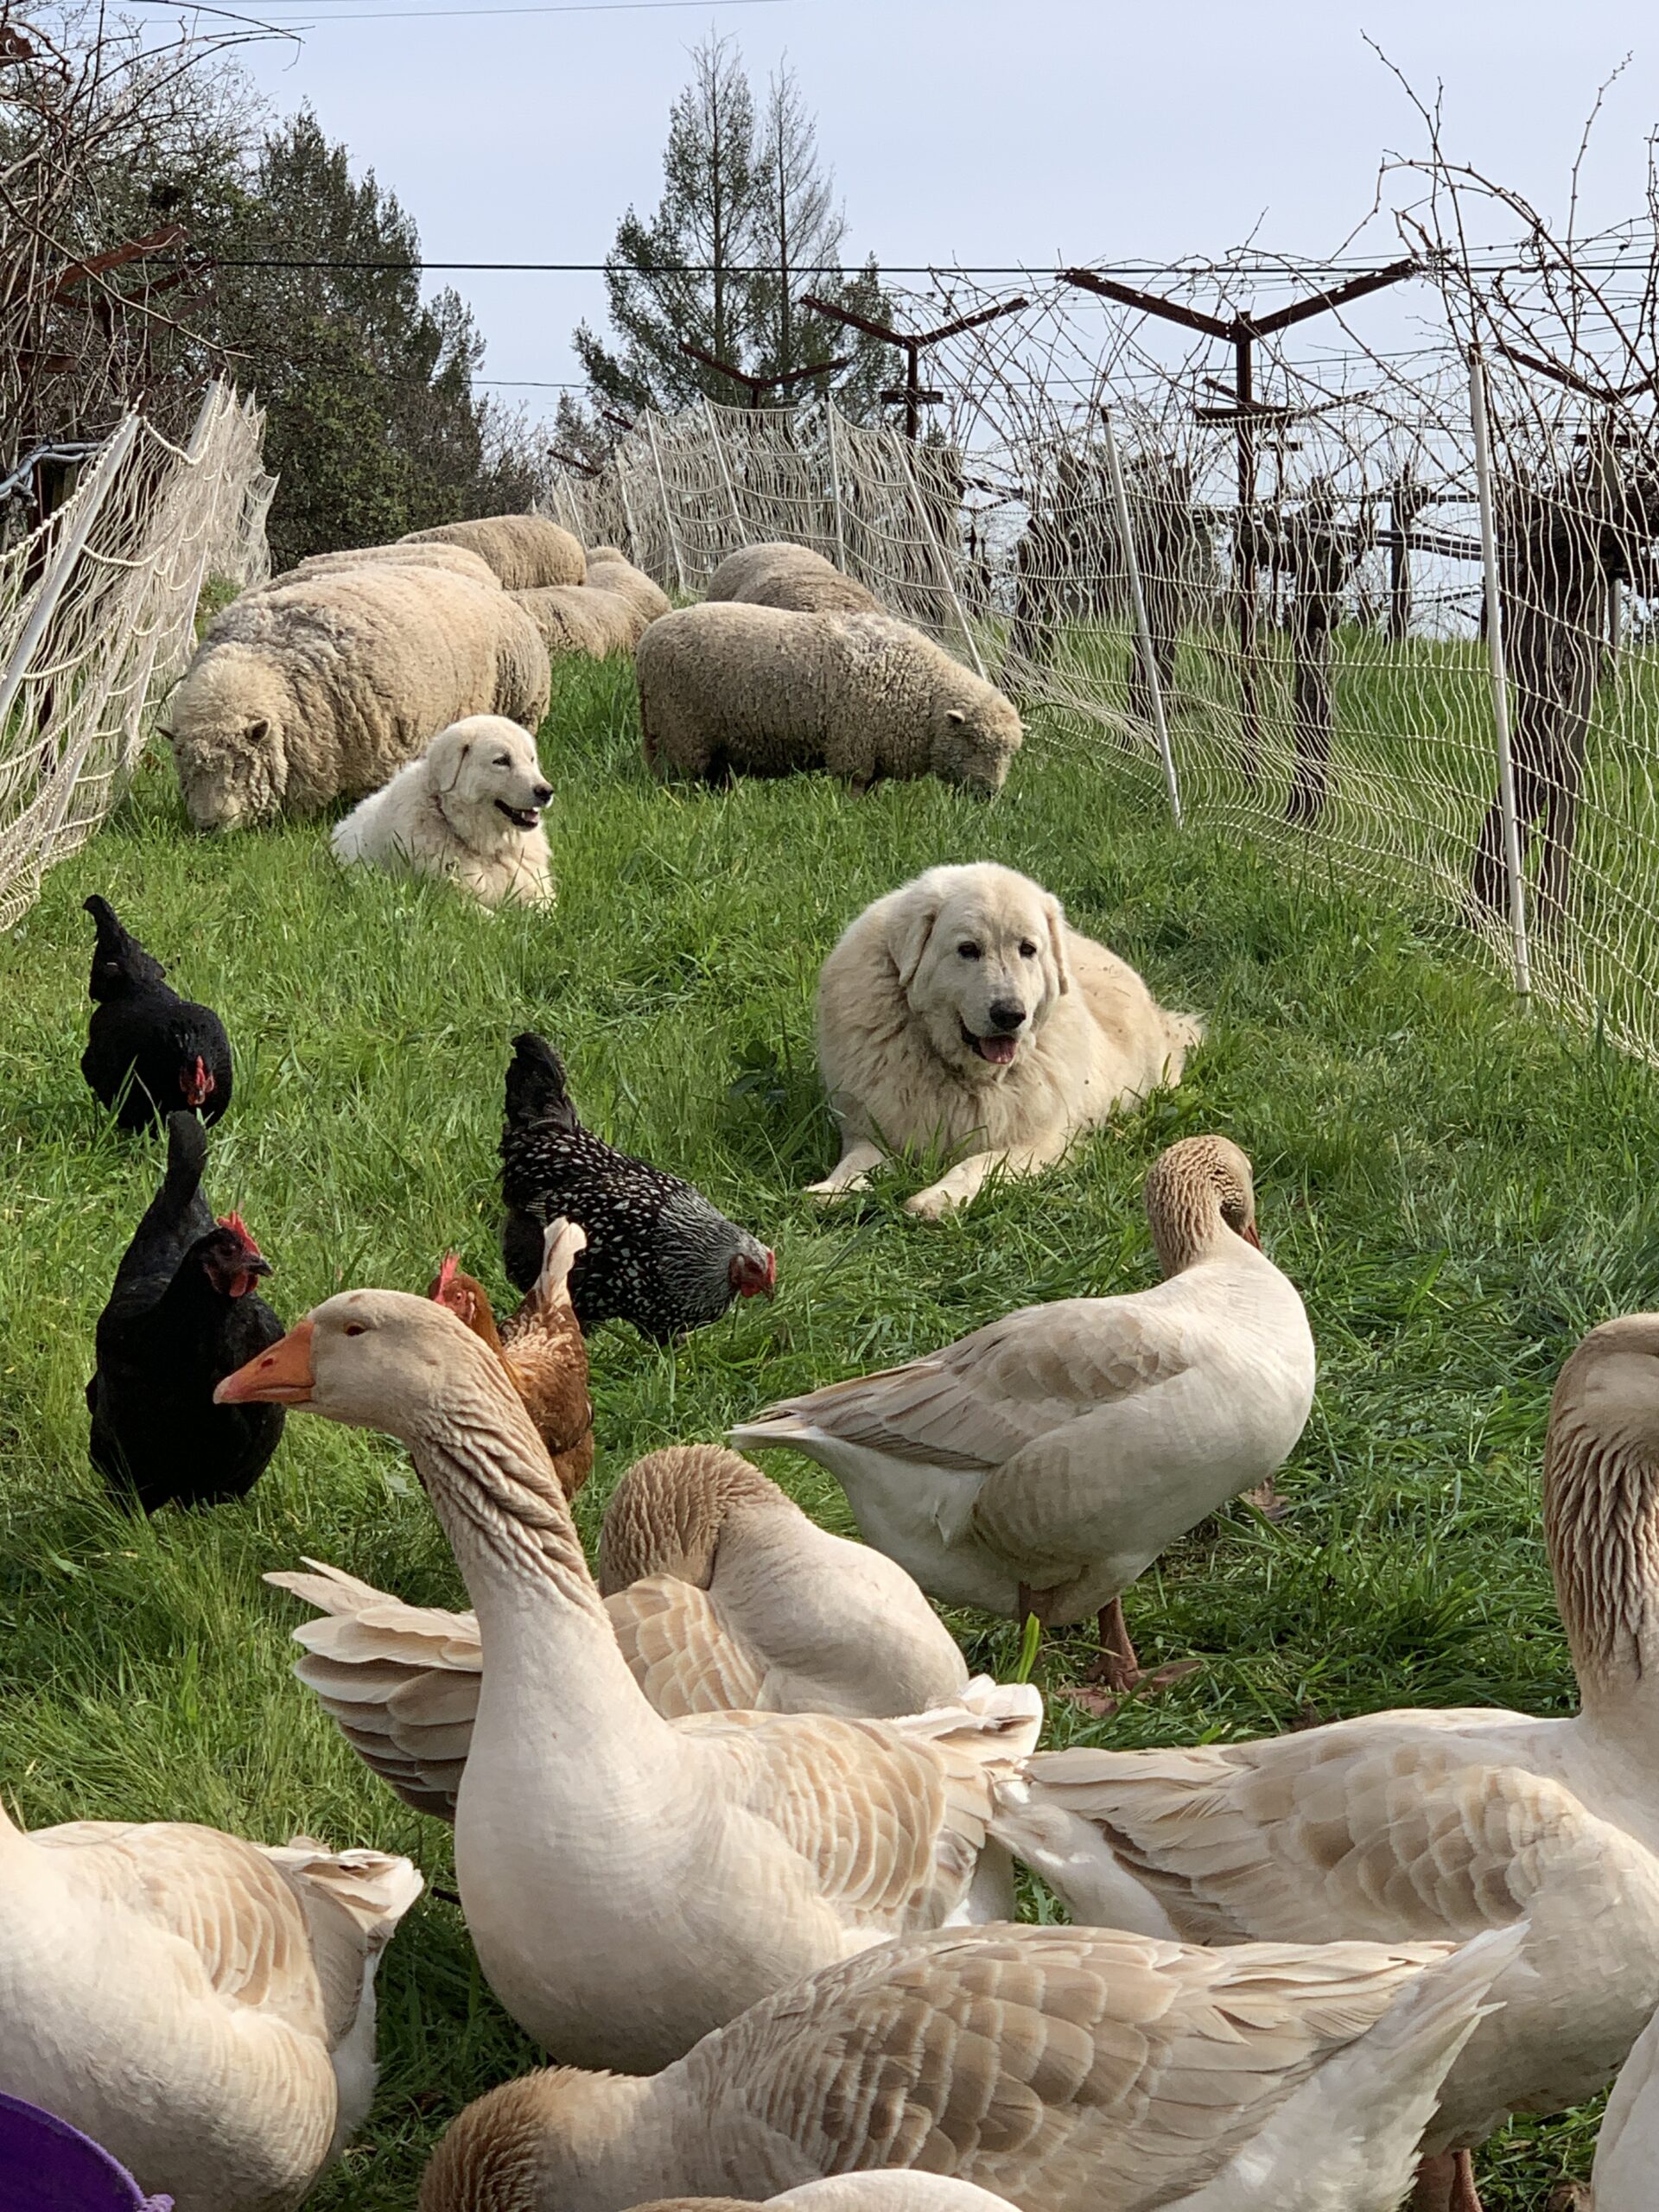 Meet the Livestock Guardian Canine of Sonoma County